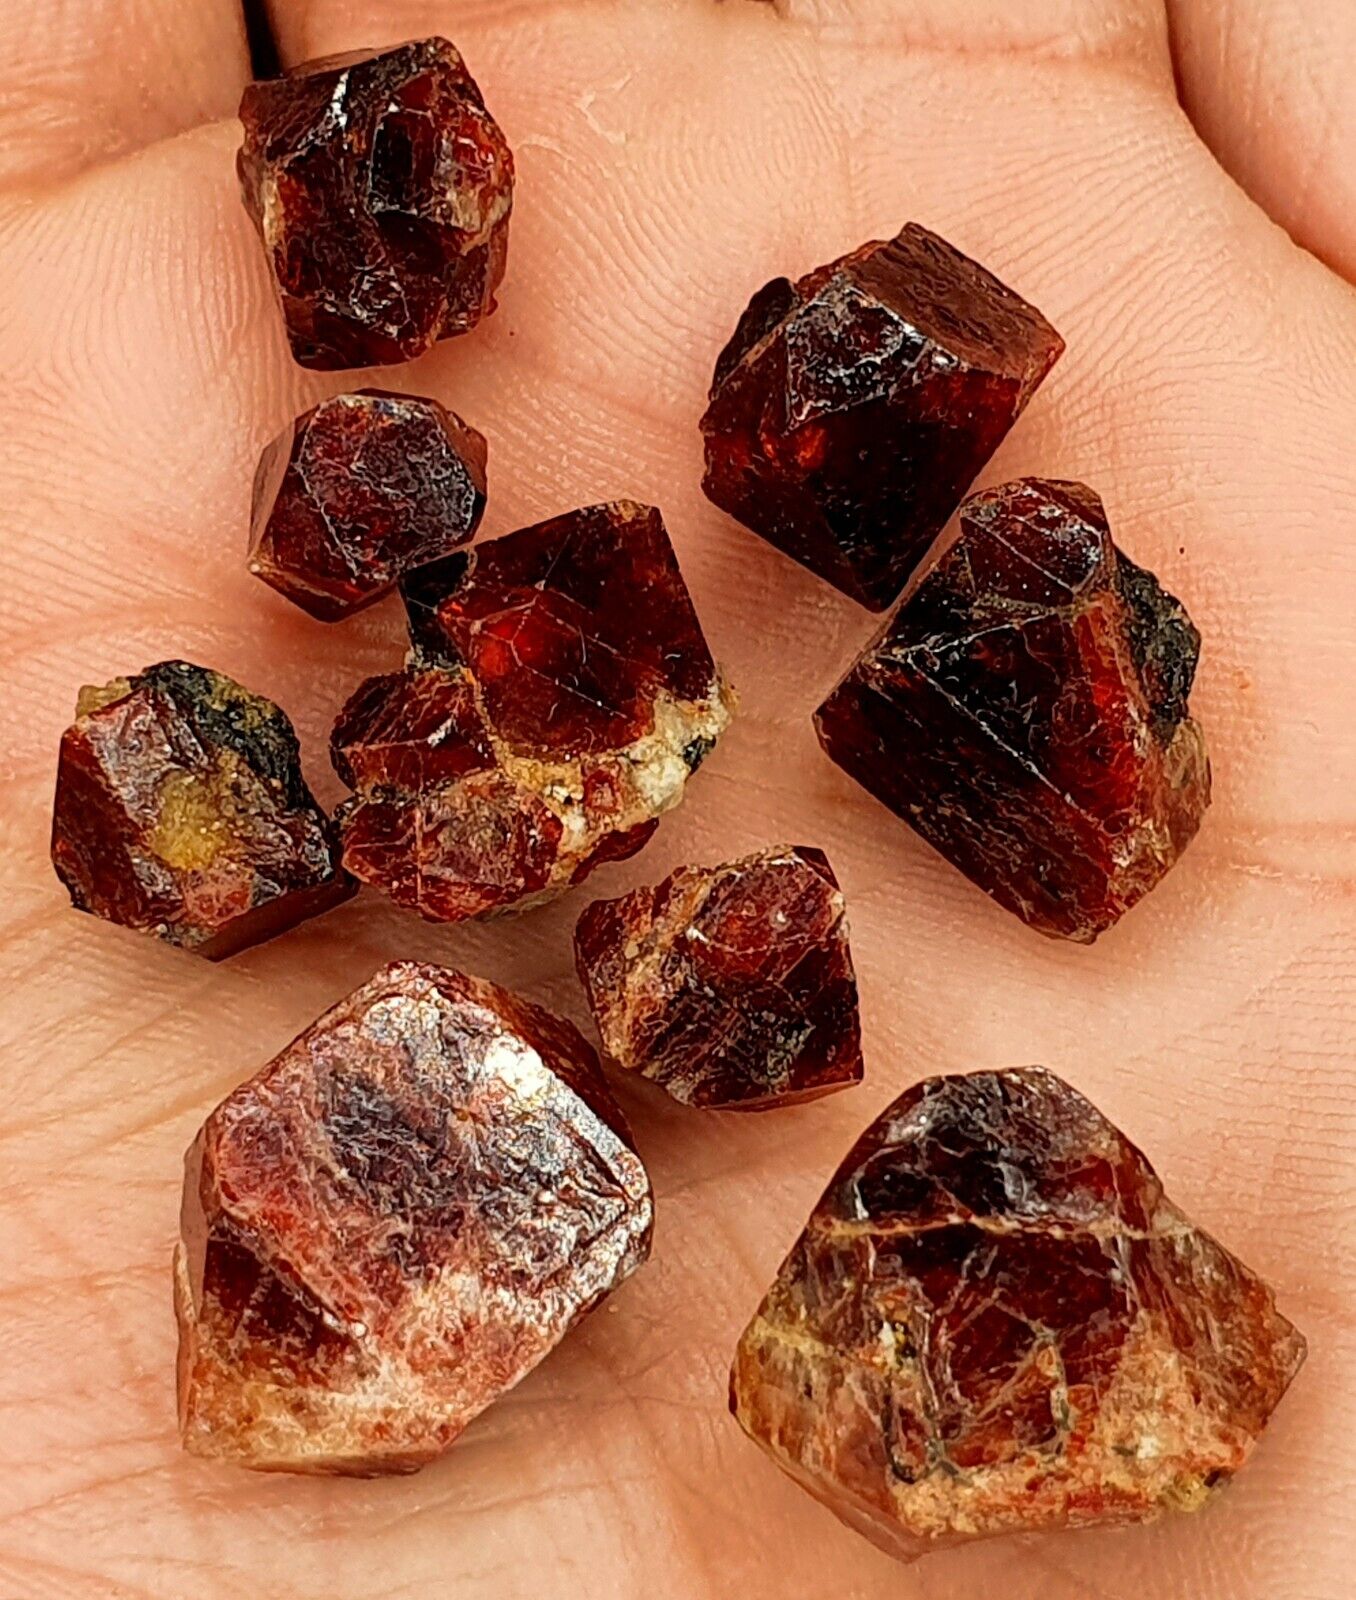 155 Carats Top Quality Blood Red Zircon Crystal,s Lot From Skardu Pakistan